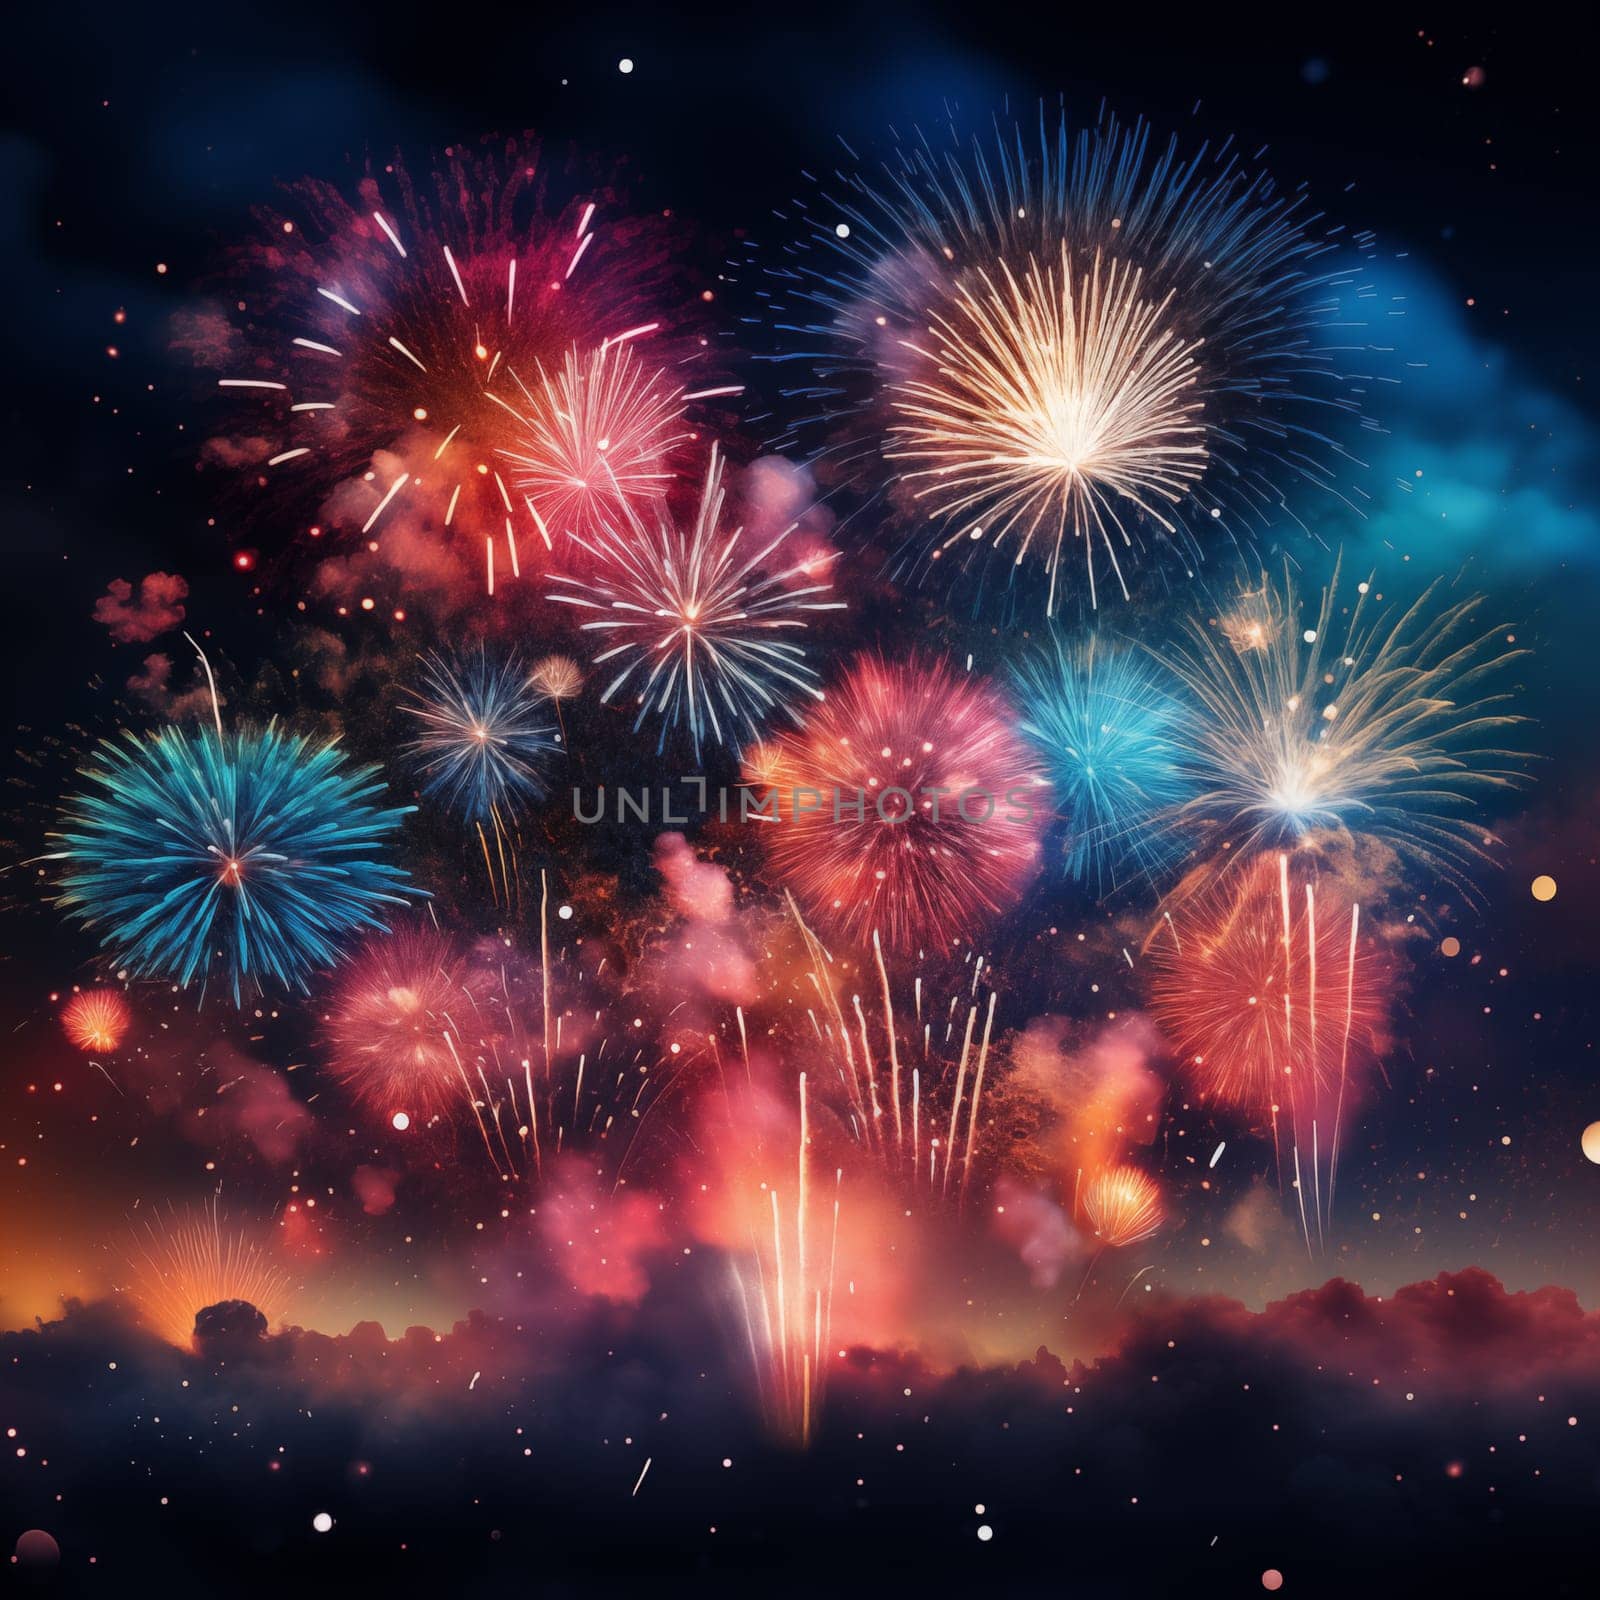 The night sky with the launch of colorful fireworks .